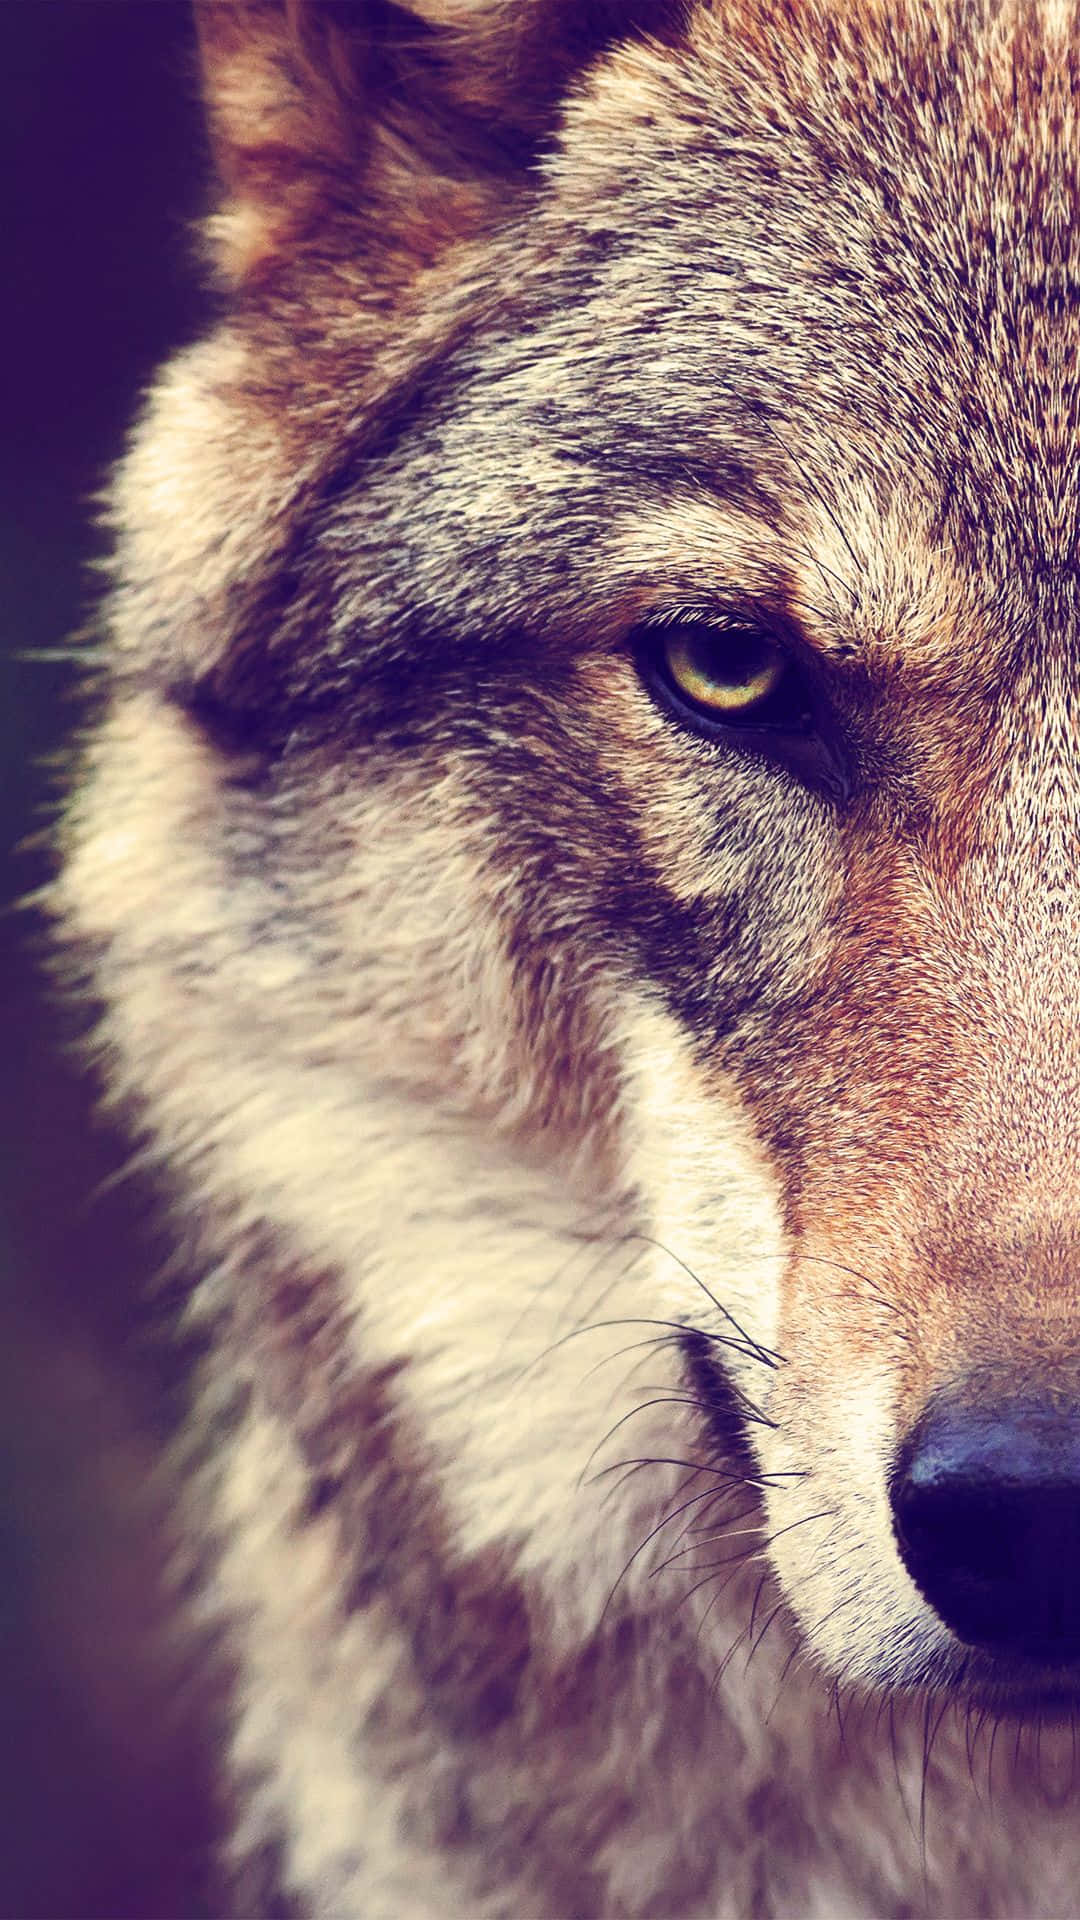 "Howl at the moon looking fierce with this edgy wolf iPhone wallpaper" Wallpaper